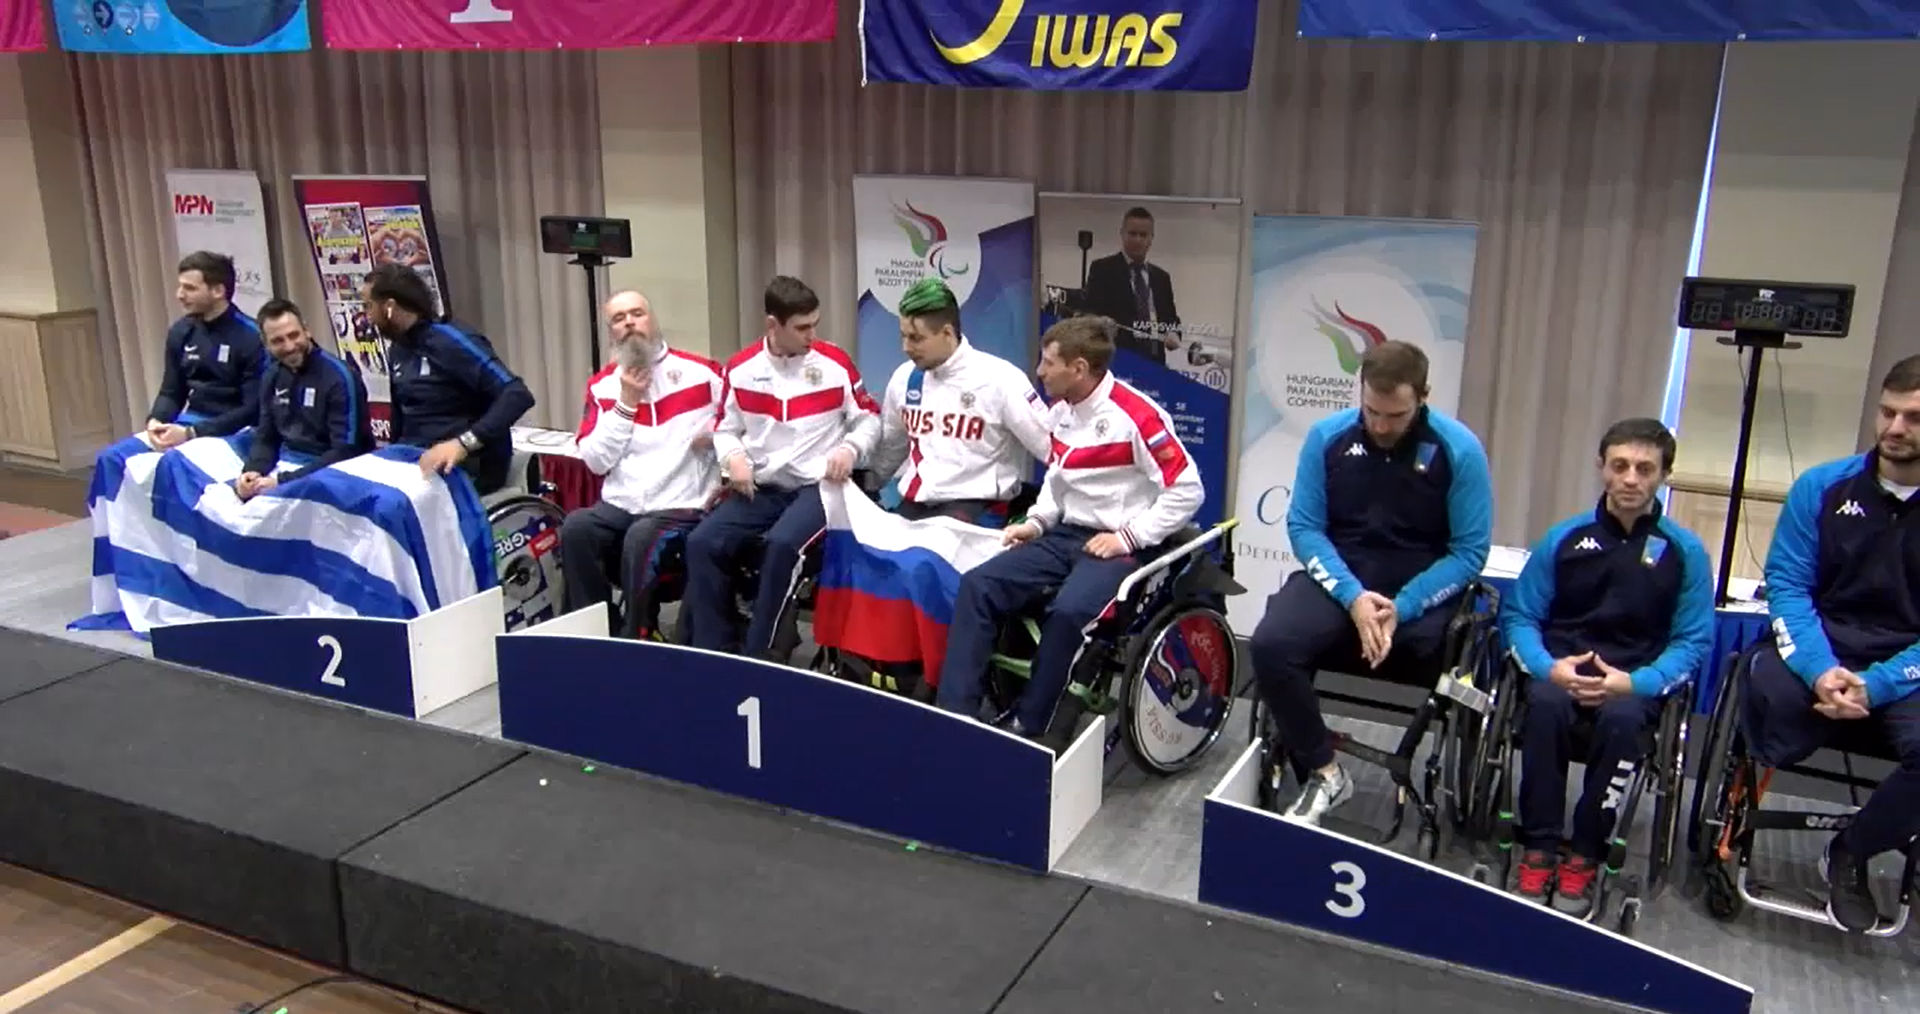 Russia won the men’s team sabre competition ©YouTube/IWAS